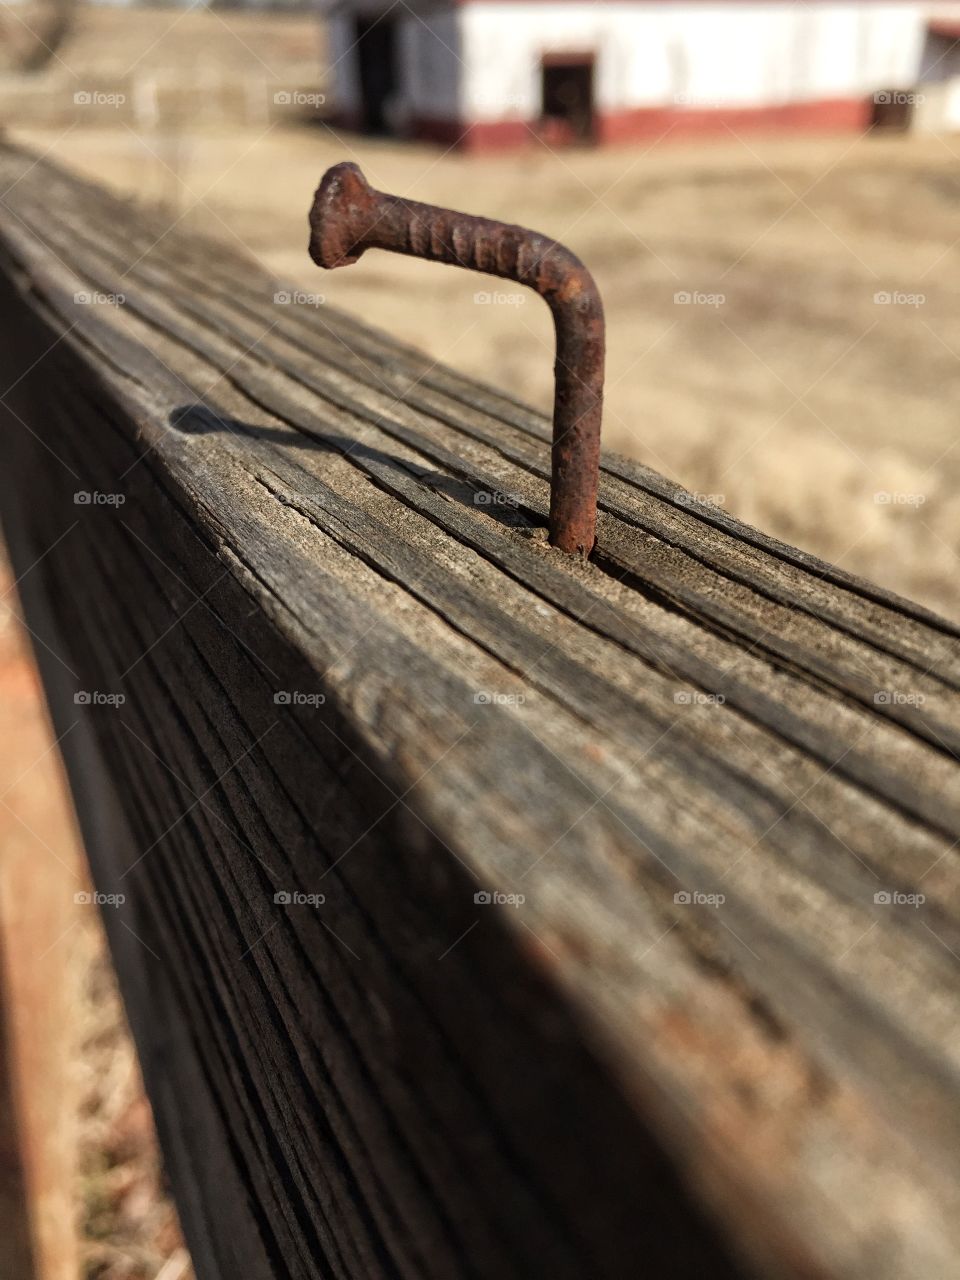 Crooked rusty nail in an old wooden fence on the farm